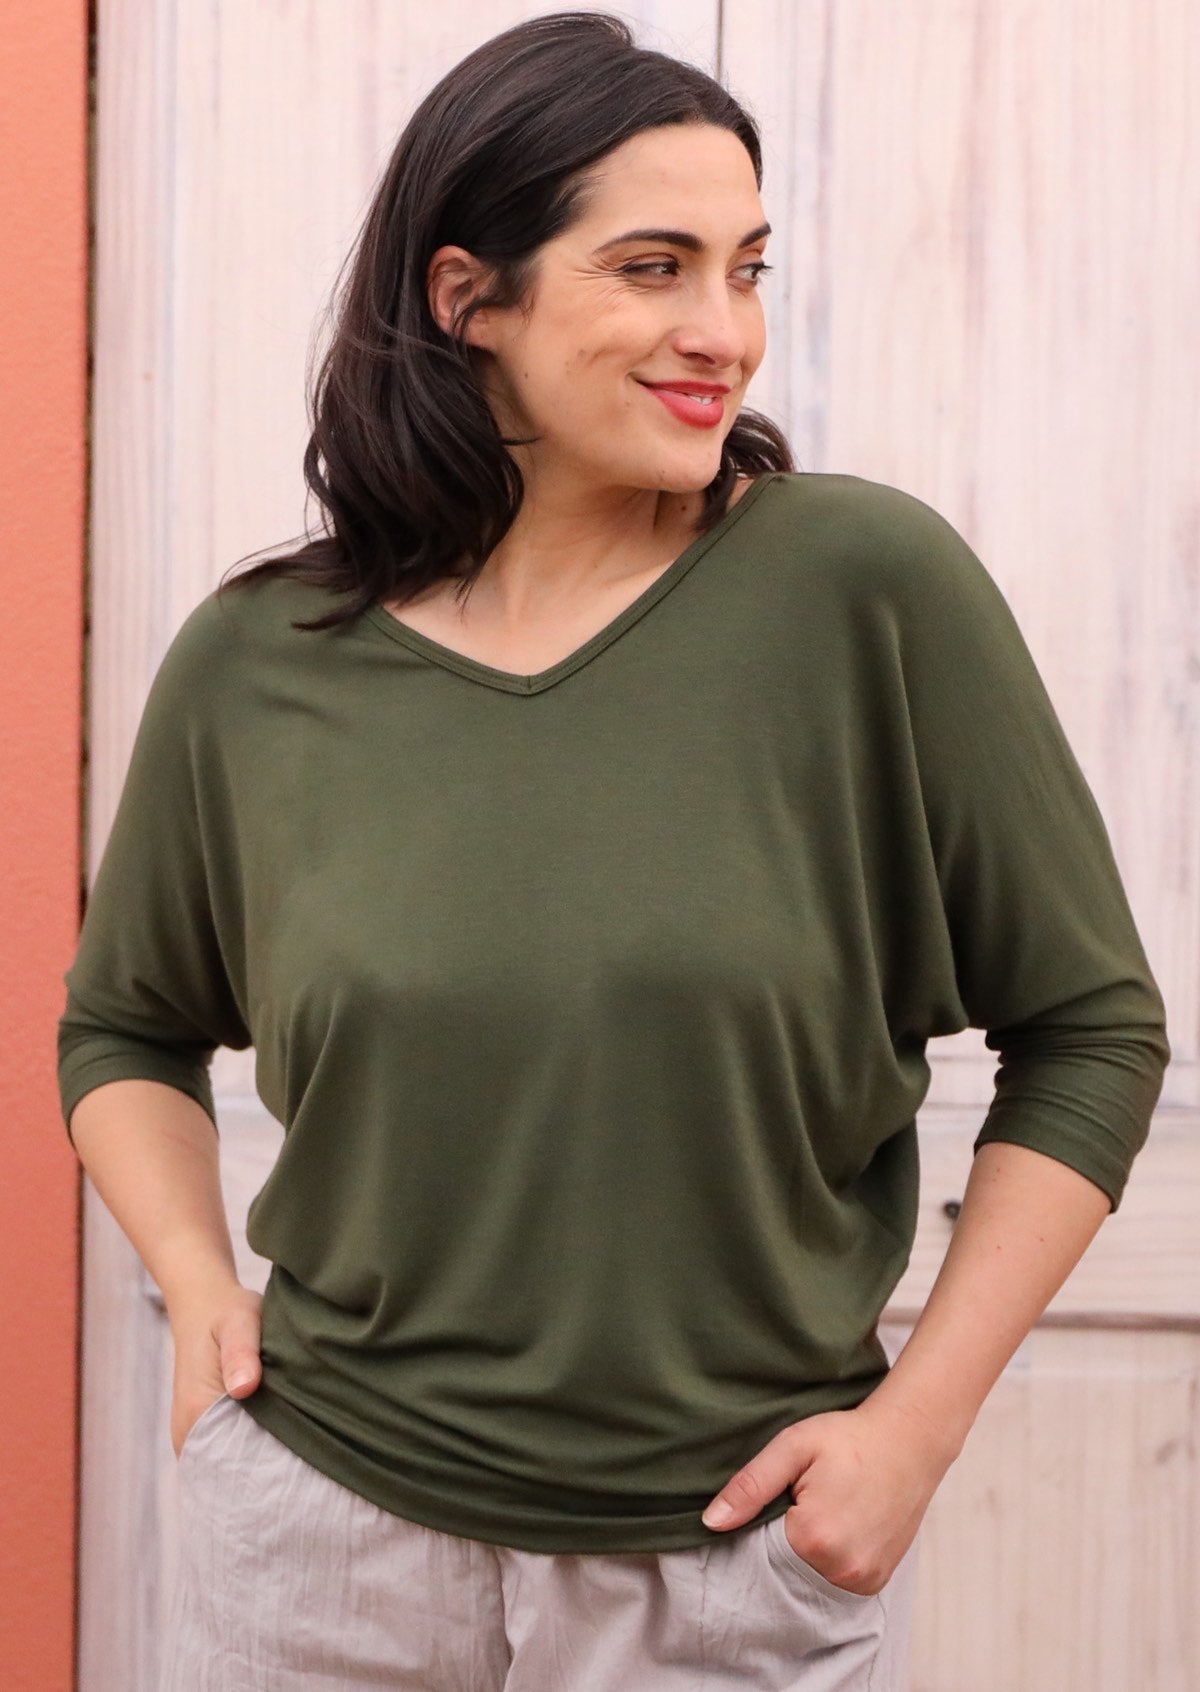 Woman wearing a 3/4 sleeve rayon batwing v-neck olive top.